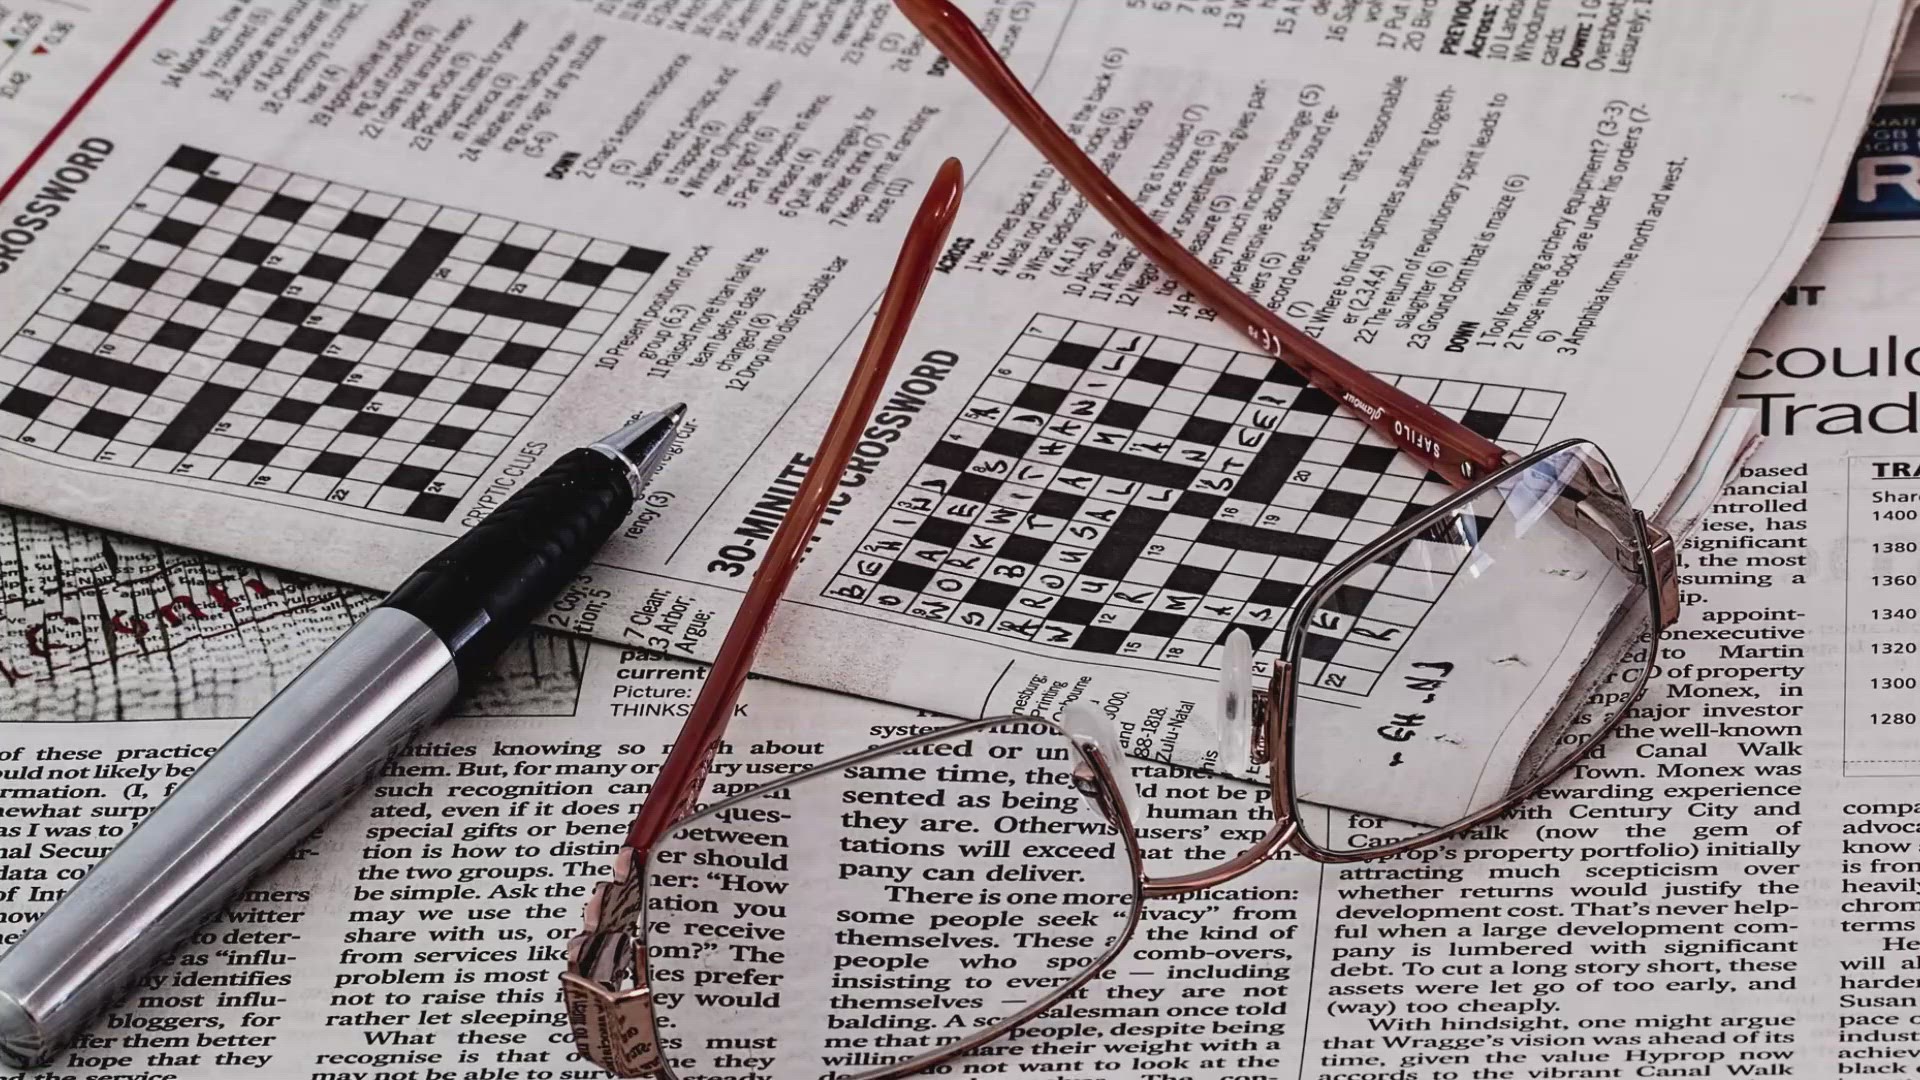 Here's a clue to a poorly planned crossword